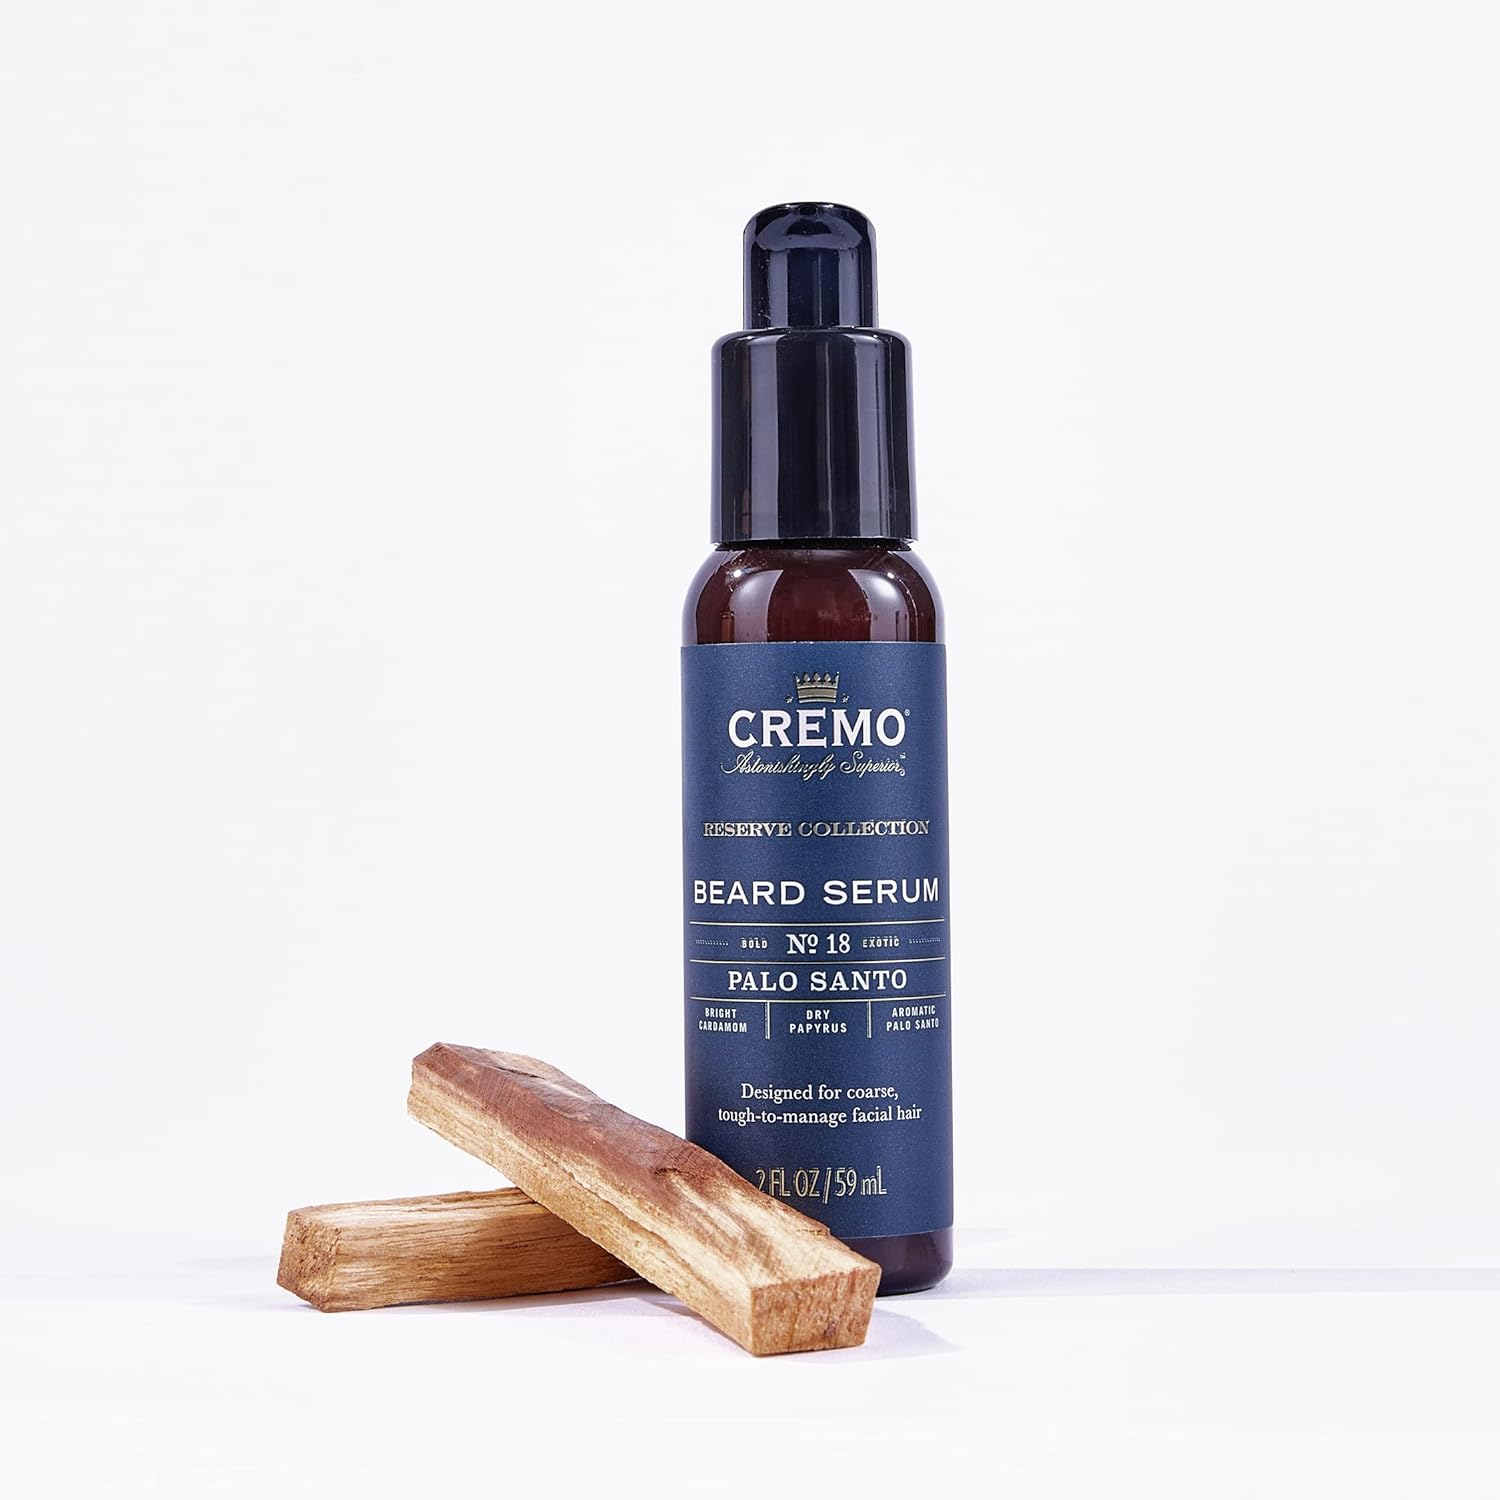 Cremo Beard Serum, Palo Santo Reserve Collection - Restores Moisture, Softens and Reduces Beard Itch for All Lengths of Facial Hair, 2 Fluid Ounces : Beauty & Personal Care